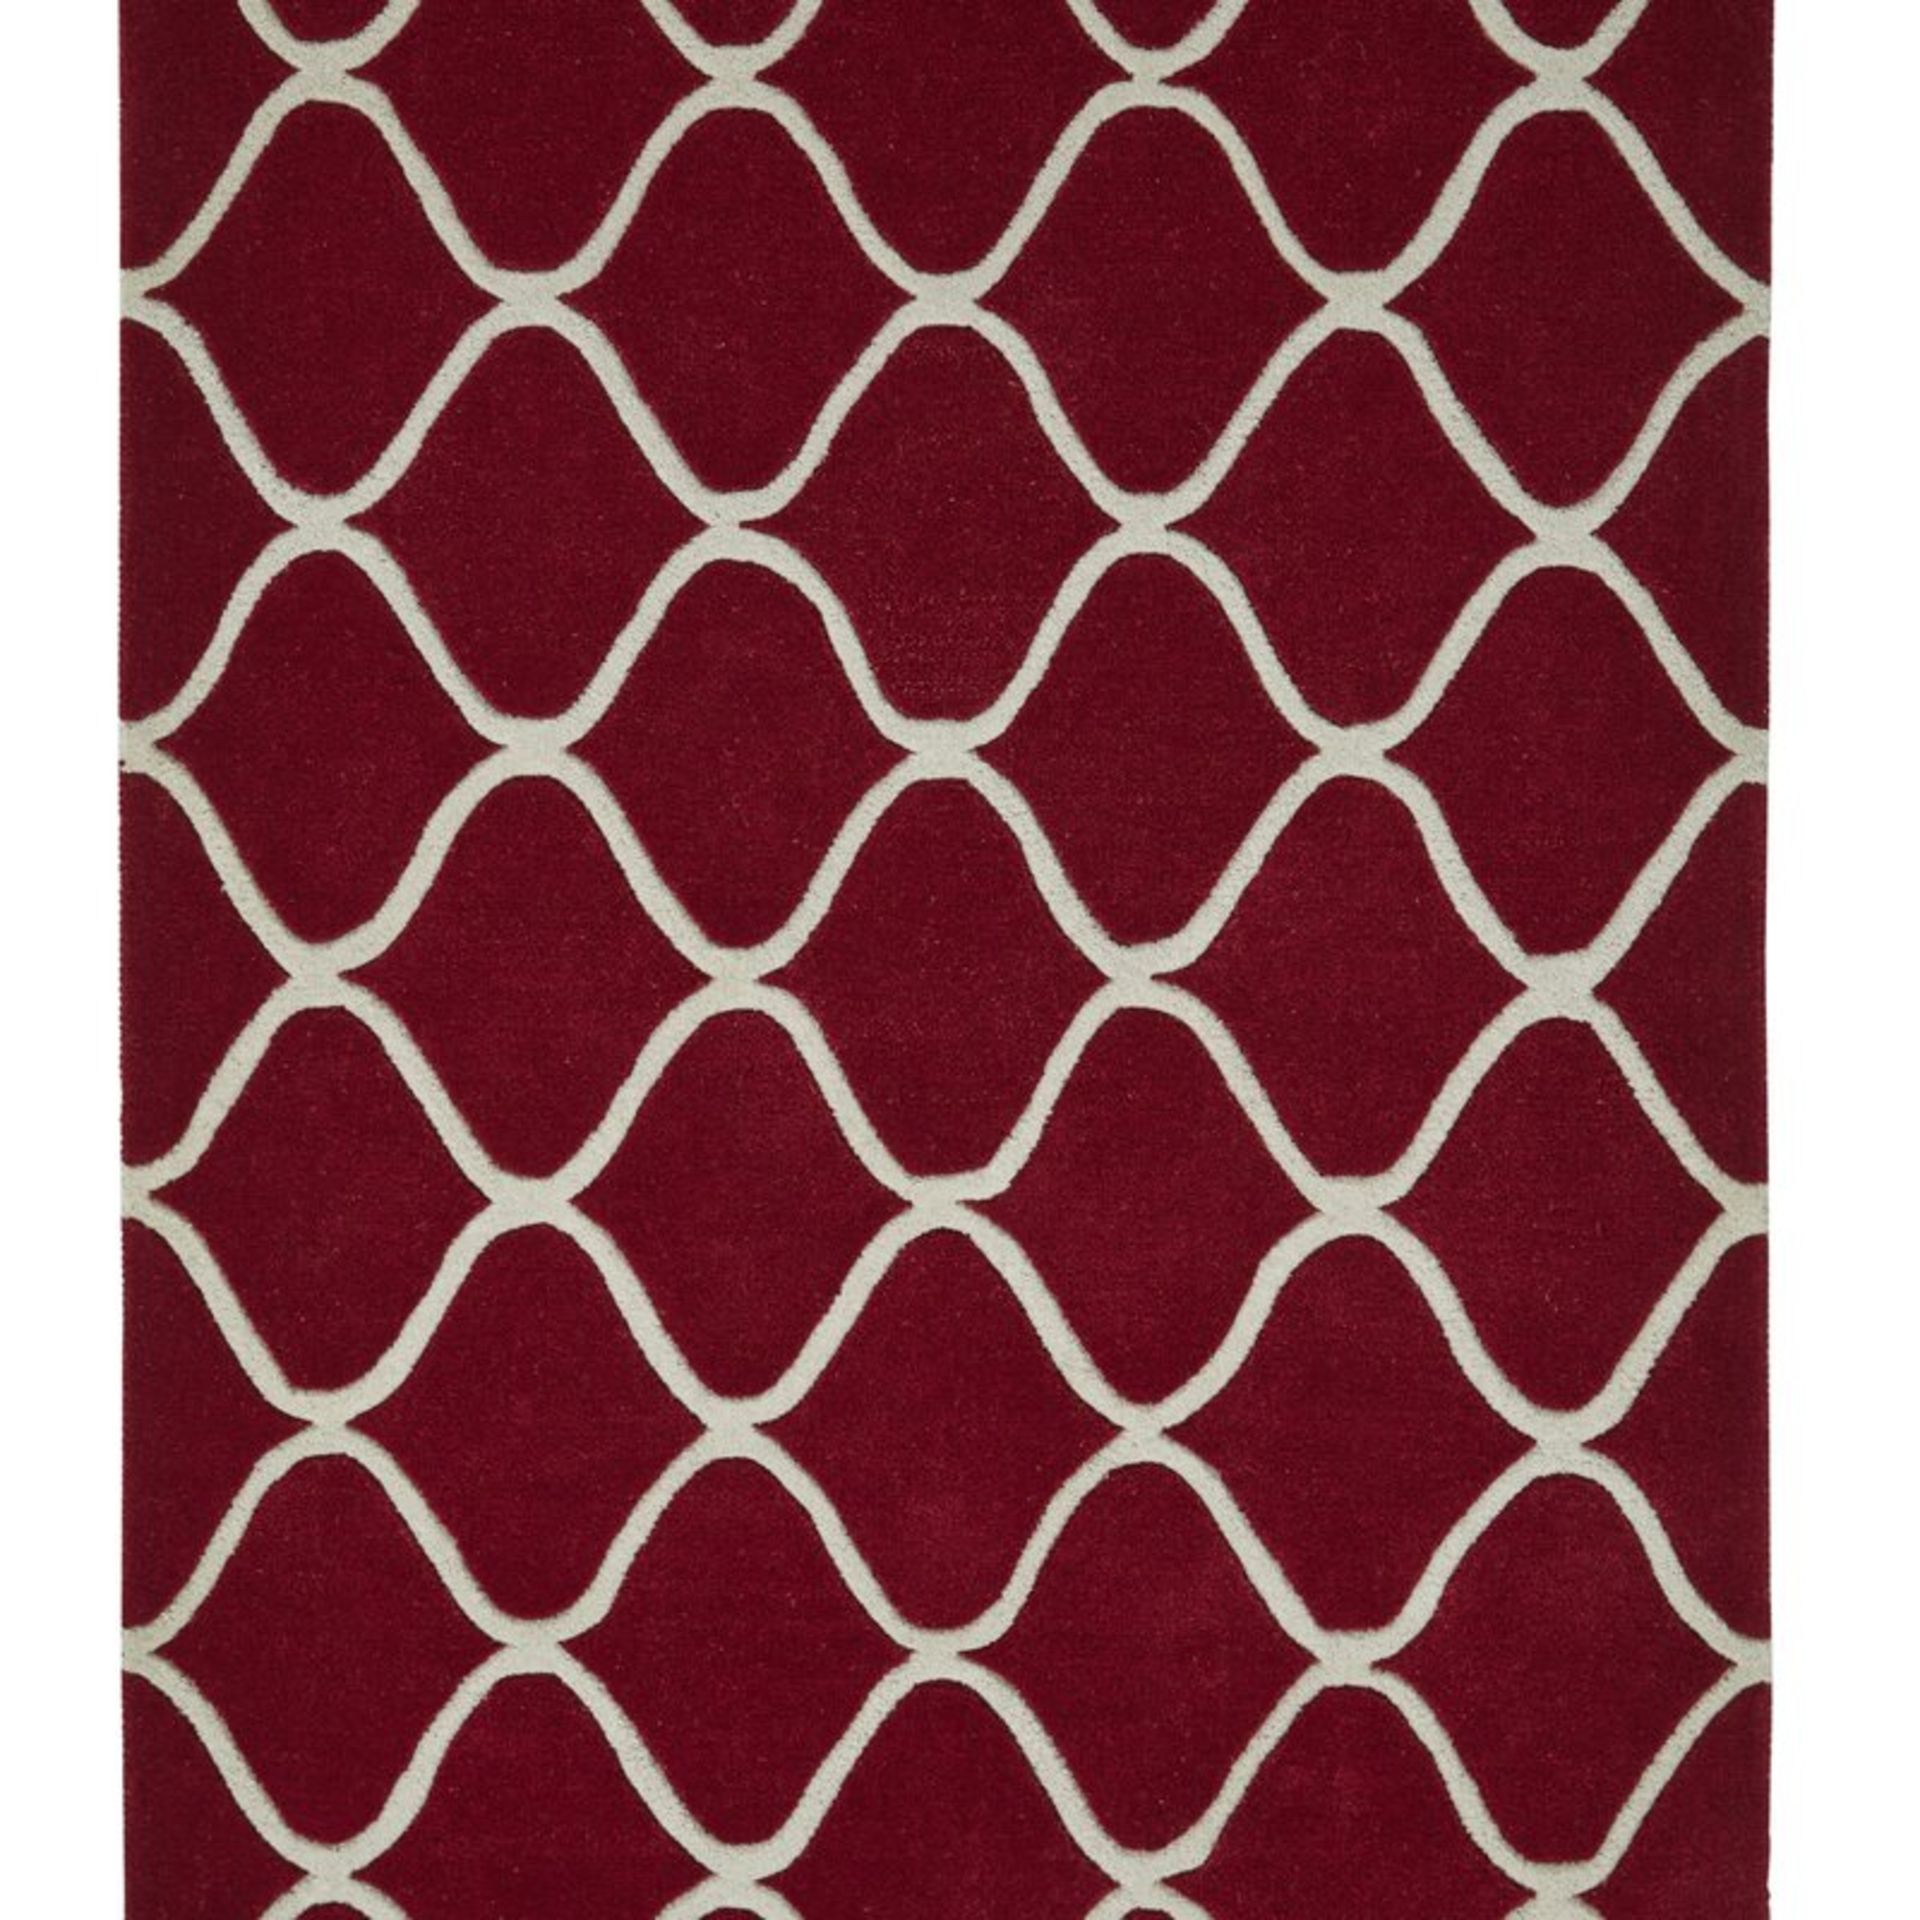 Selma Hand-Woven Red Area Rug, - Image 2 of 3